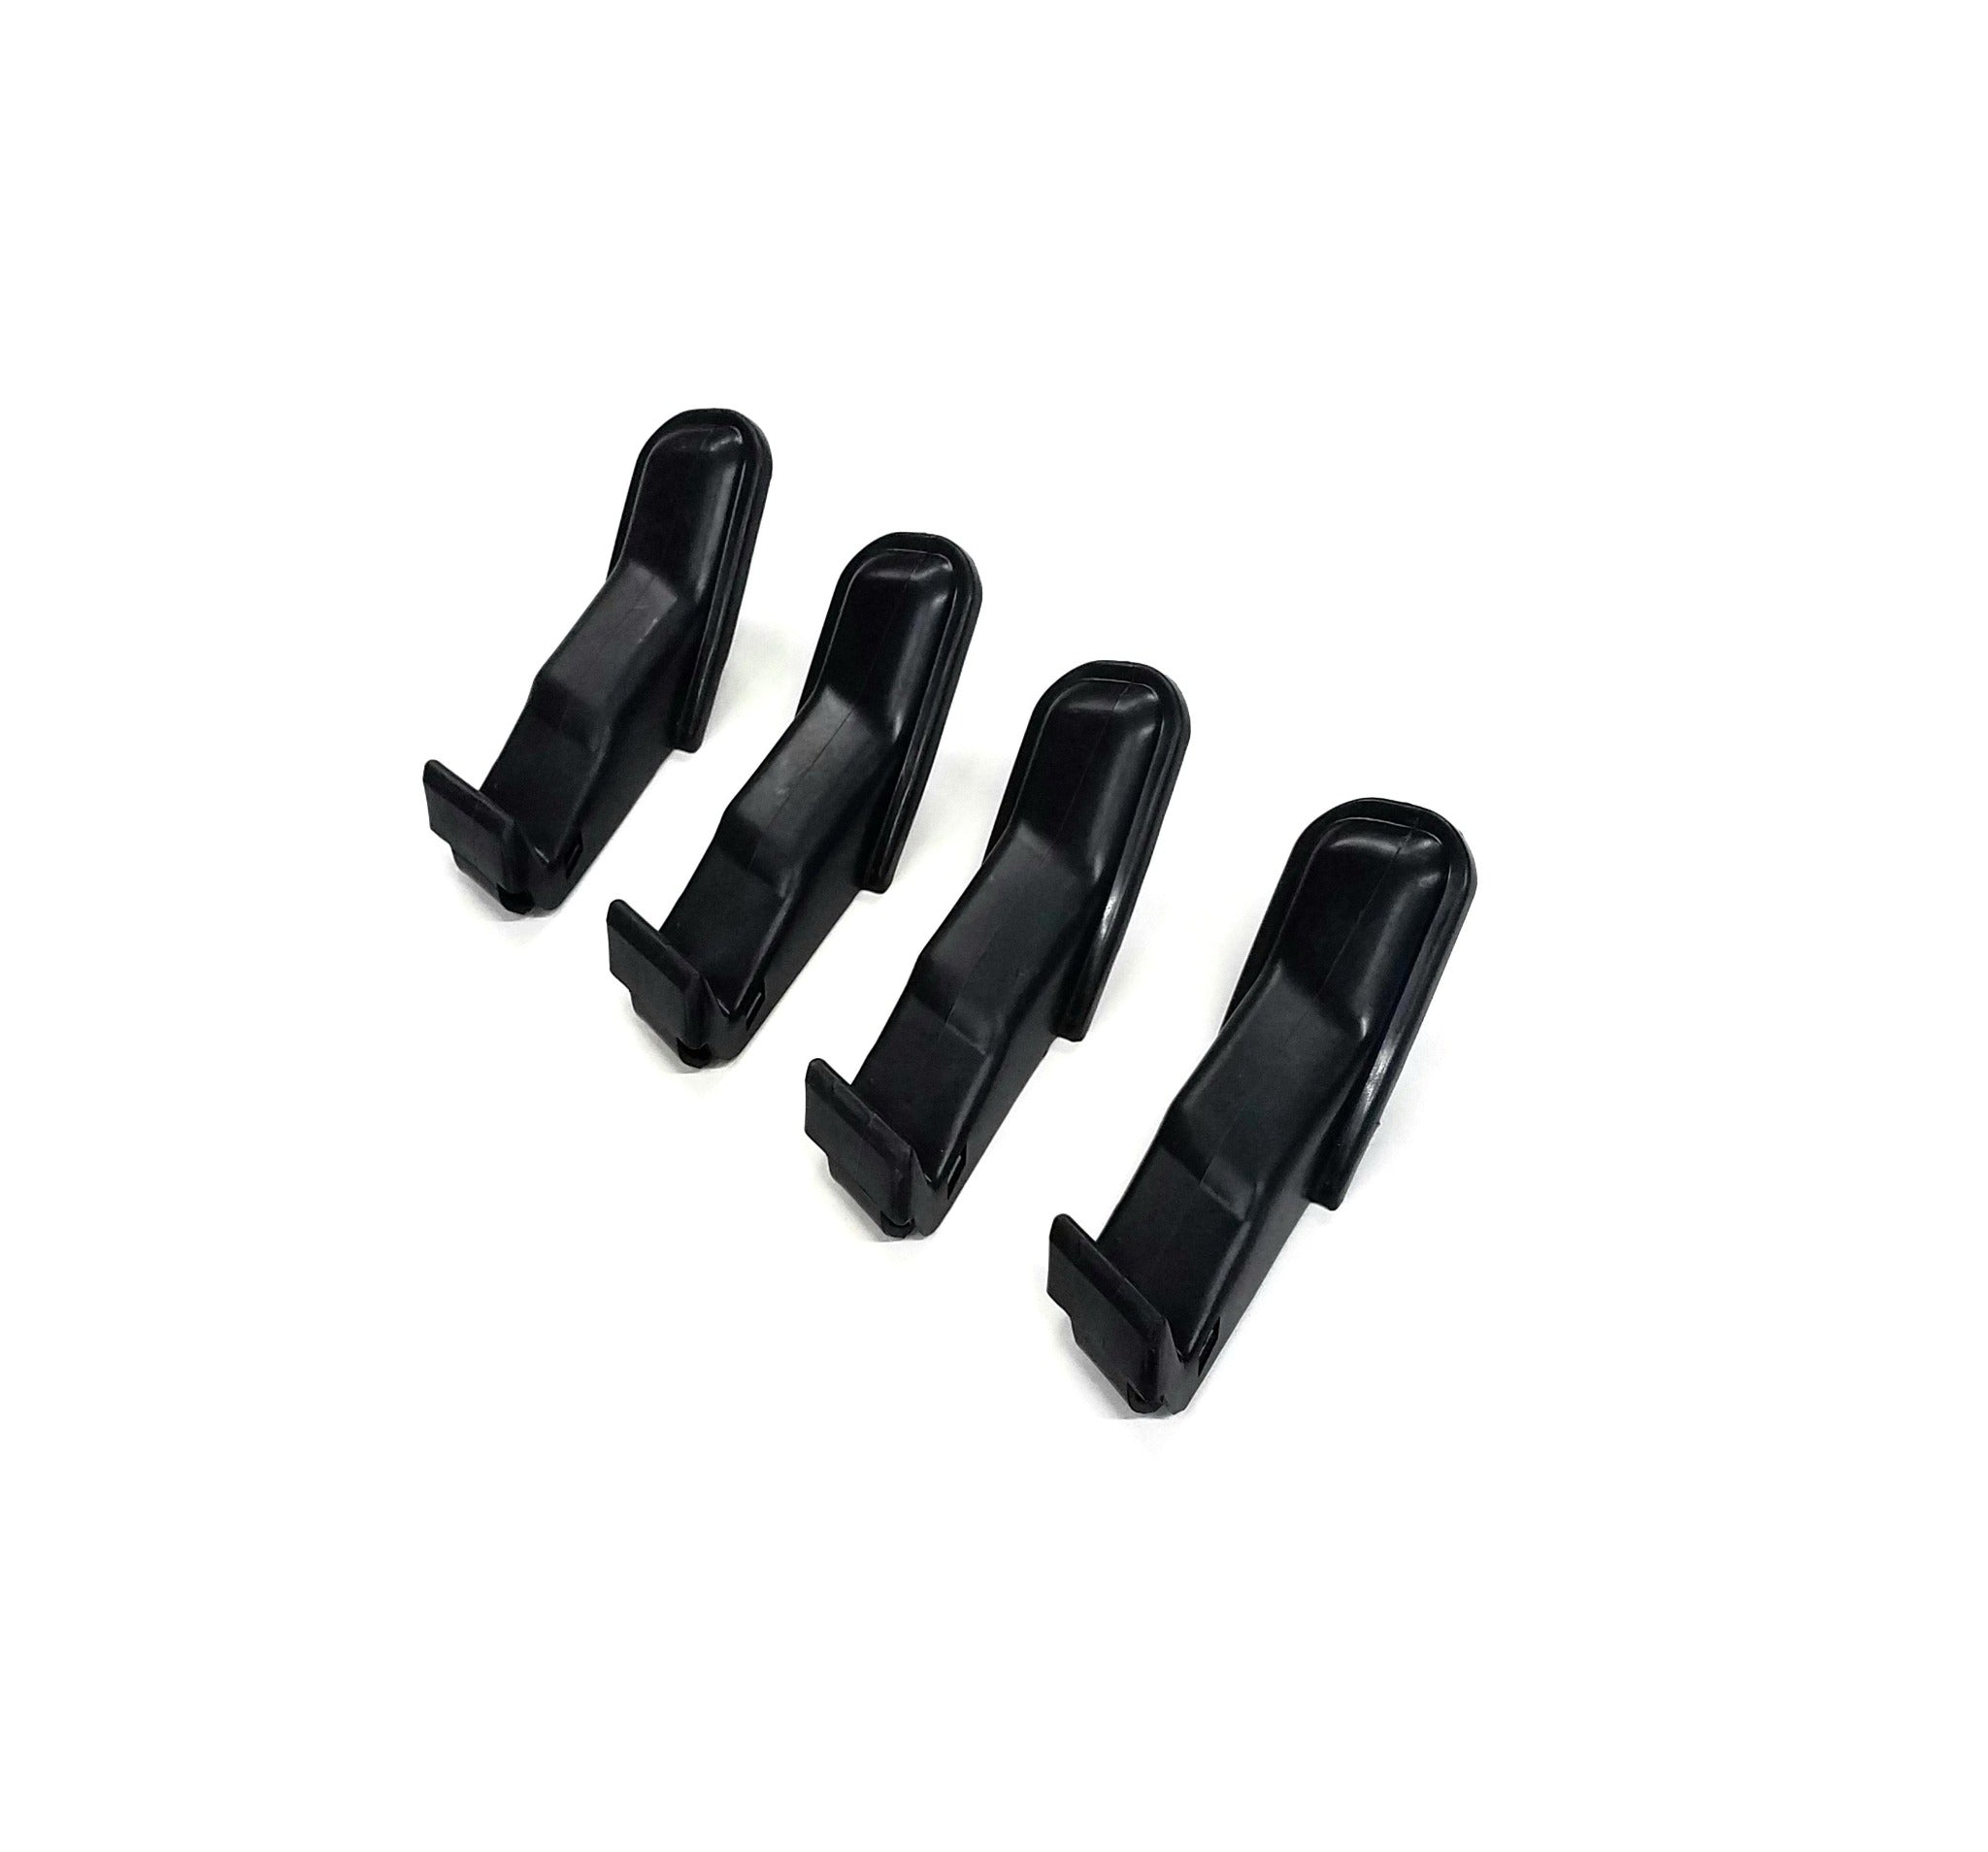 Sicam Jaw Cover (Pack of 4)